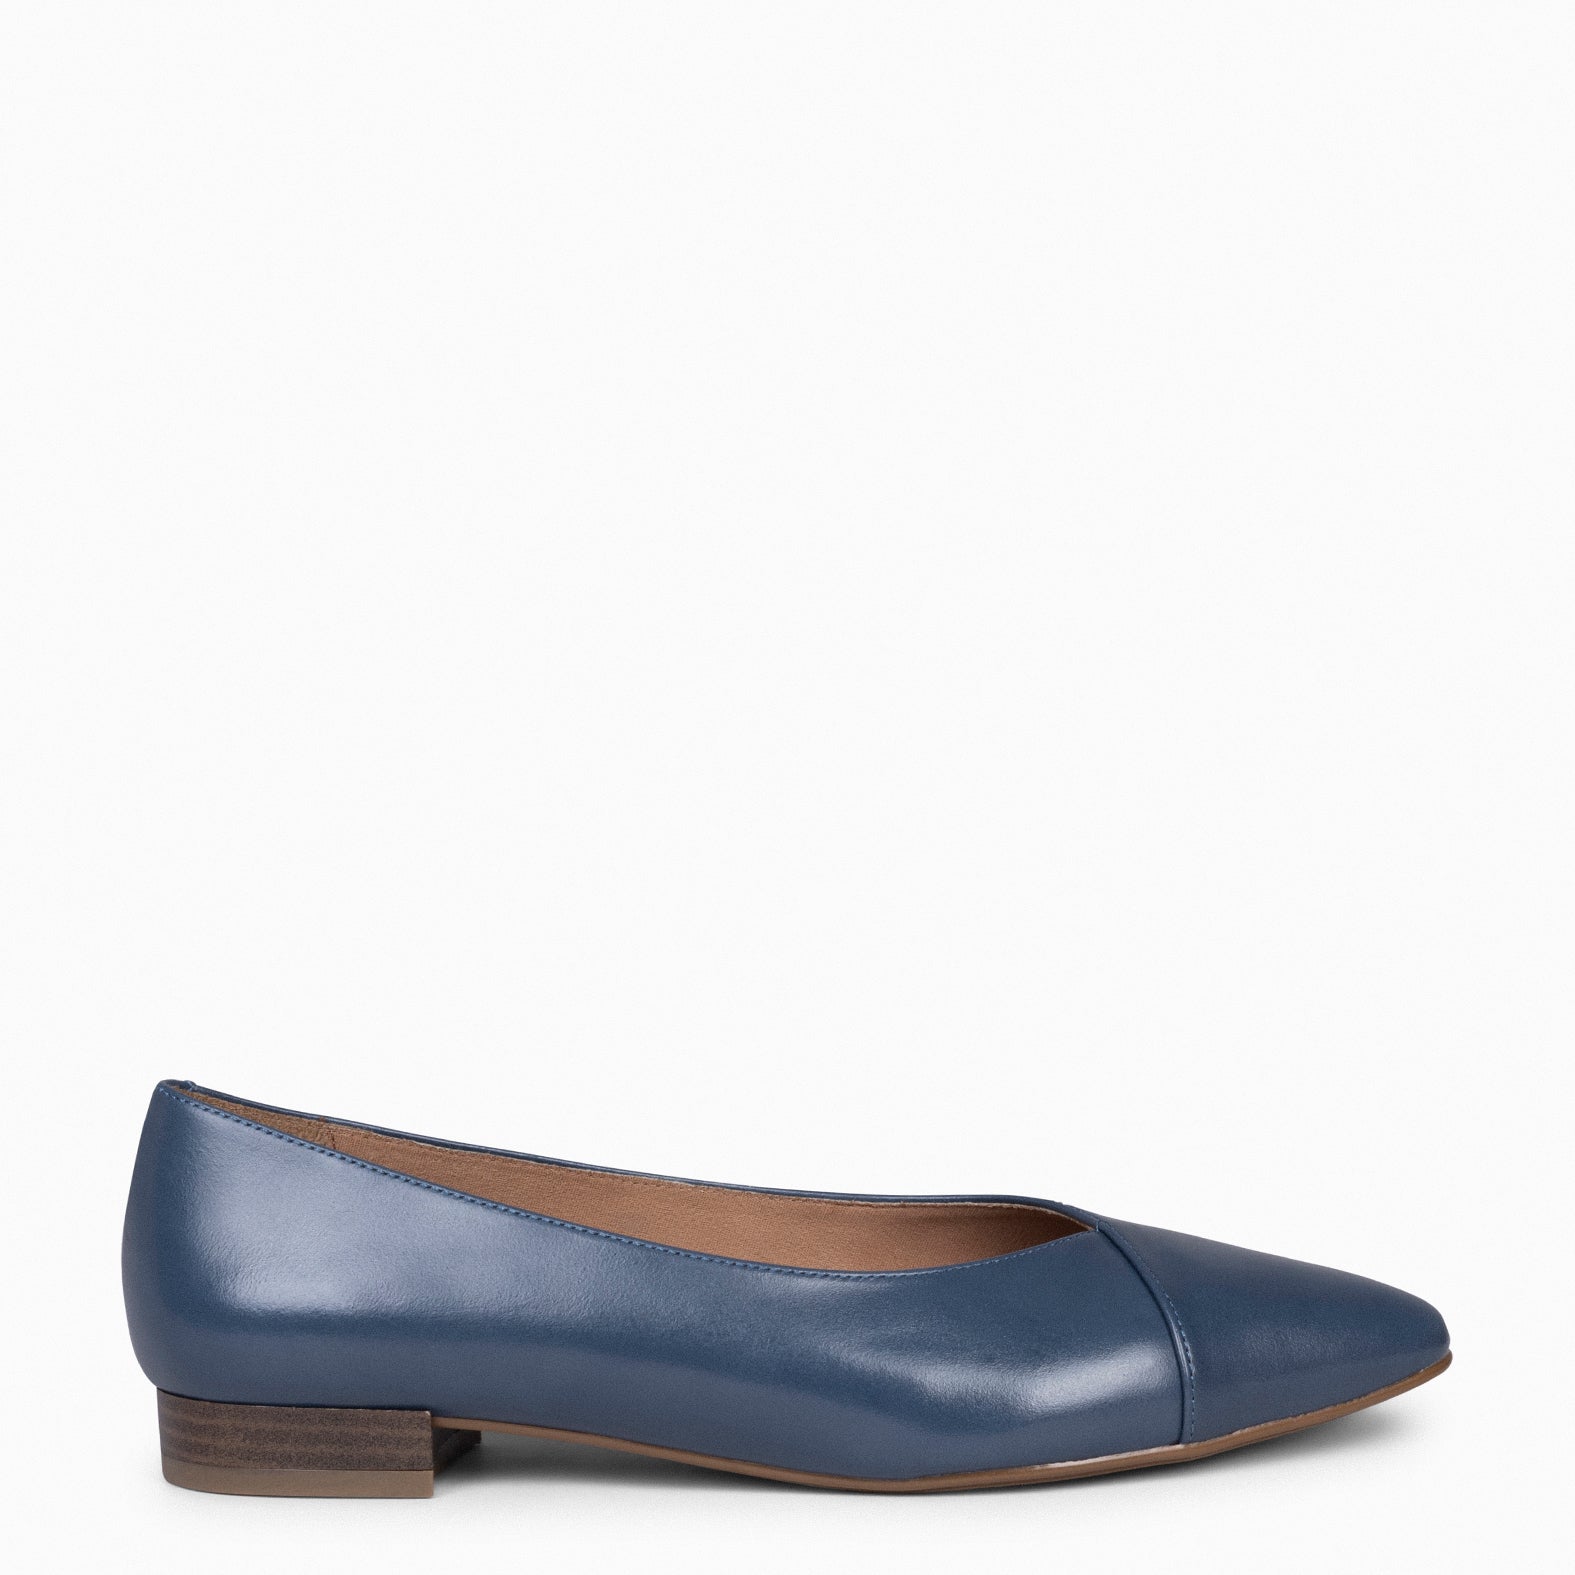 MARIE – BLUE Pointed toe flats 